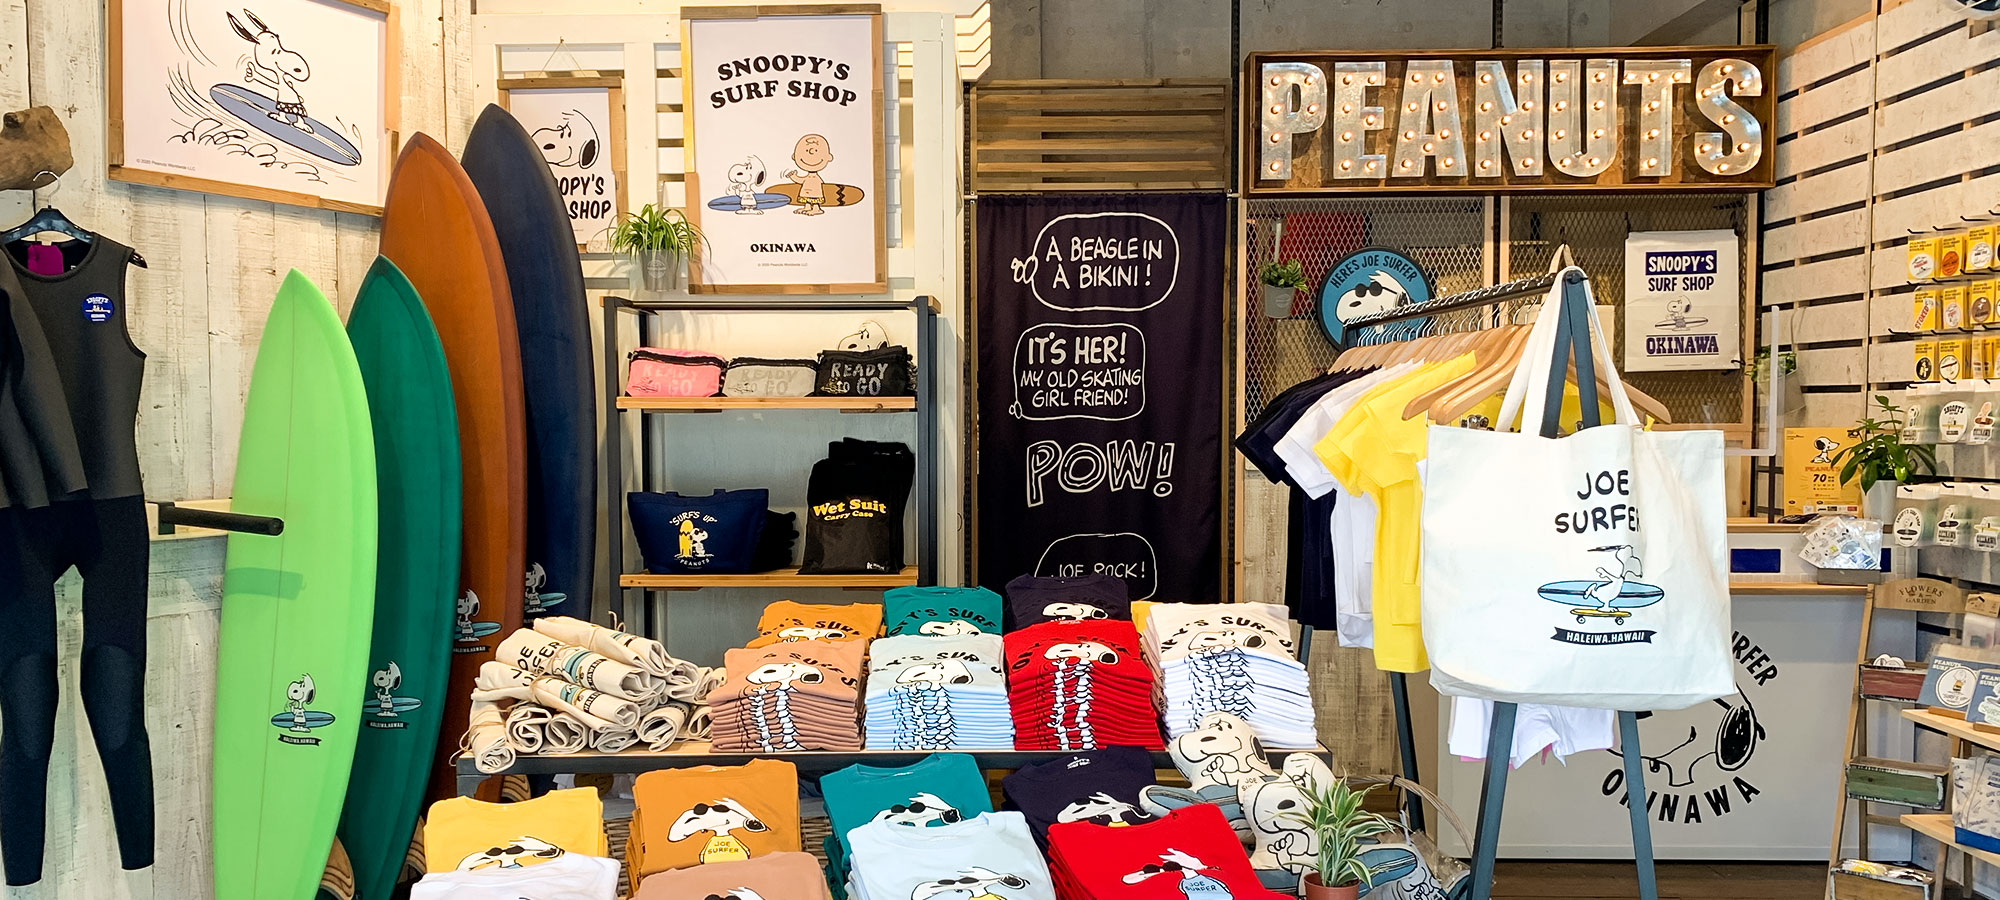 Snoopy S Surf Shop